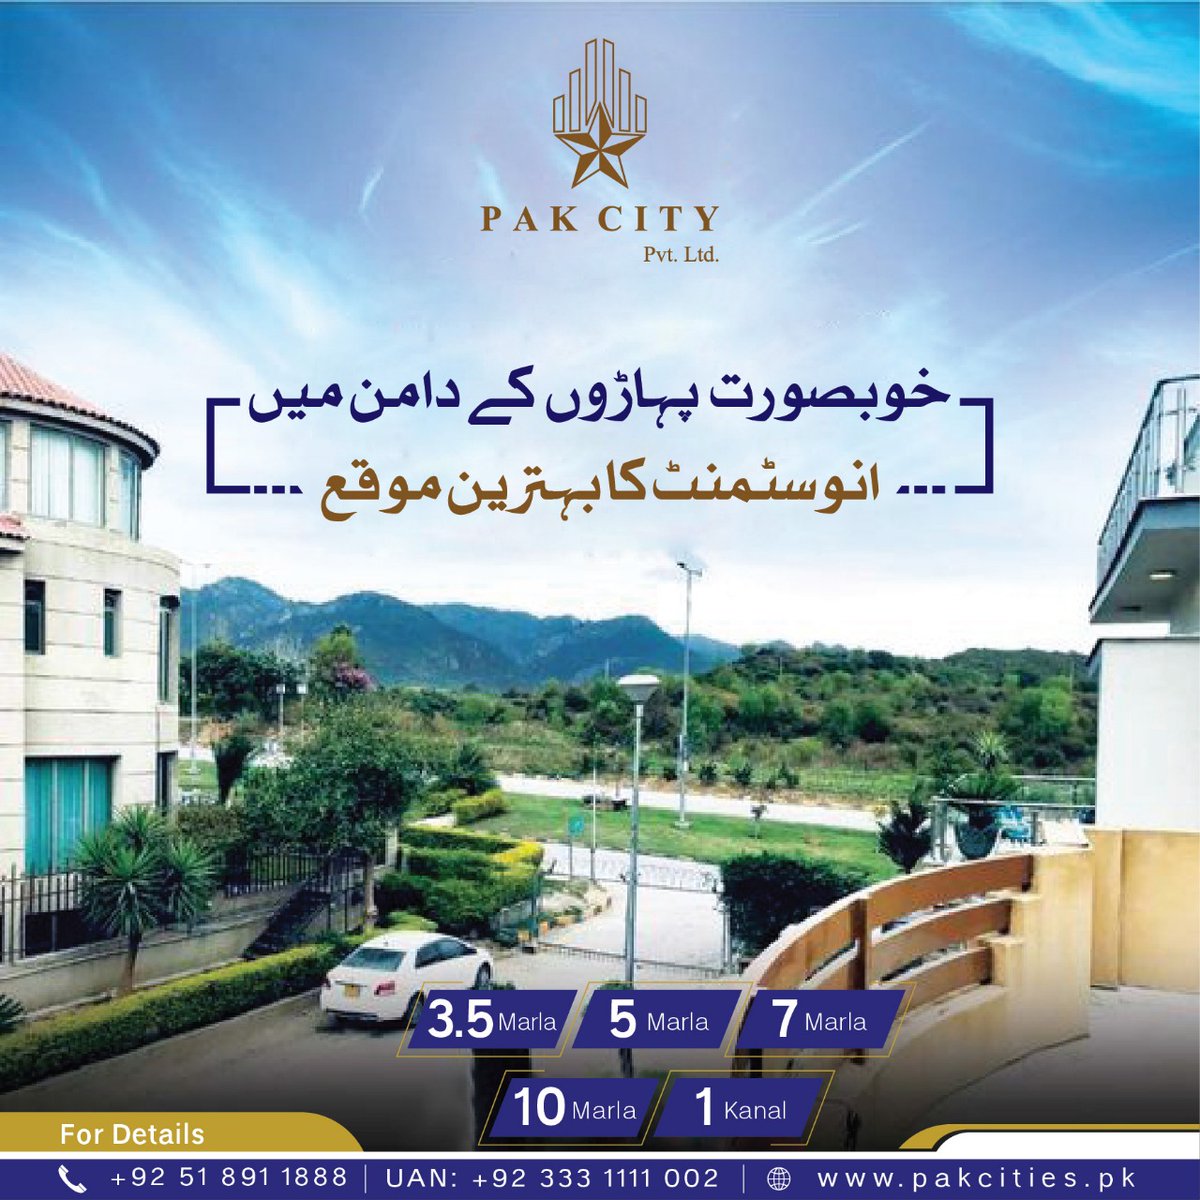 Pak City, is a place you can call yours.

For Booking Please Contact:
Join Pak City Pvt Ltd
UAN: 0333 1111 002
0332 8999998
051 8911998

#pakcity #pakcitypvtltd #newhousingsociety #5marla #residentialplot #islamabadproperty #propertyinrawalpindi #realestate #easyinstallments